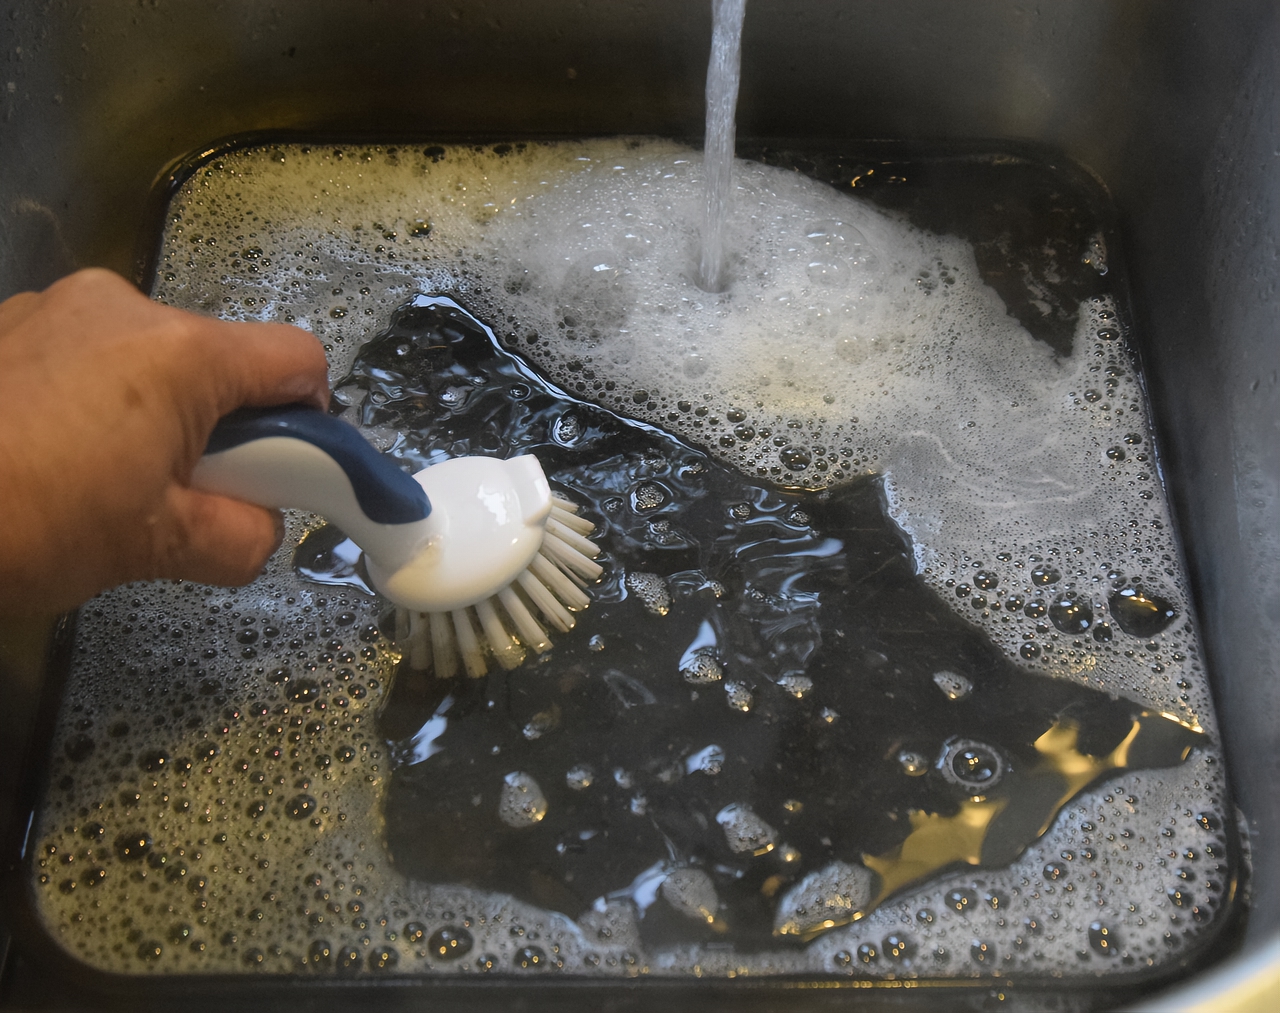 Doing the dishes in your RV kitchen sink creates grey water. Photo by Jo Zimny Photos, courtesy of Flickr Creative Commons. Cover photo via Life is a Journey, Youtube